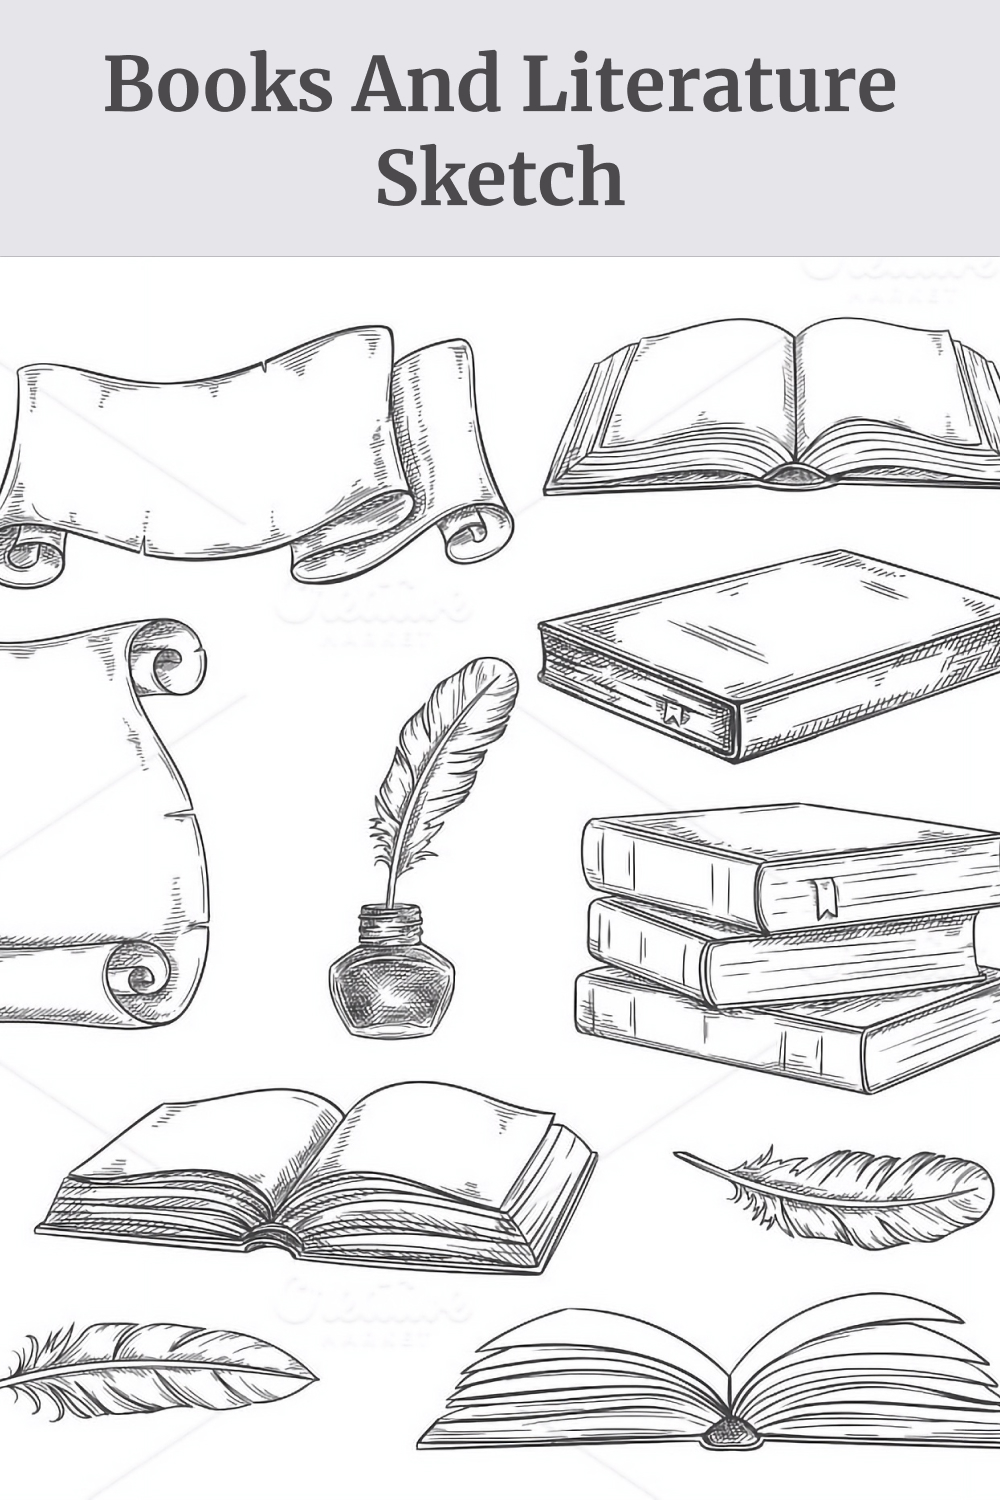 Illustrations books and literature quills sketch of pinterest.